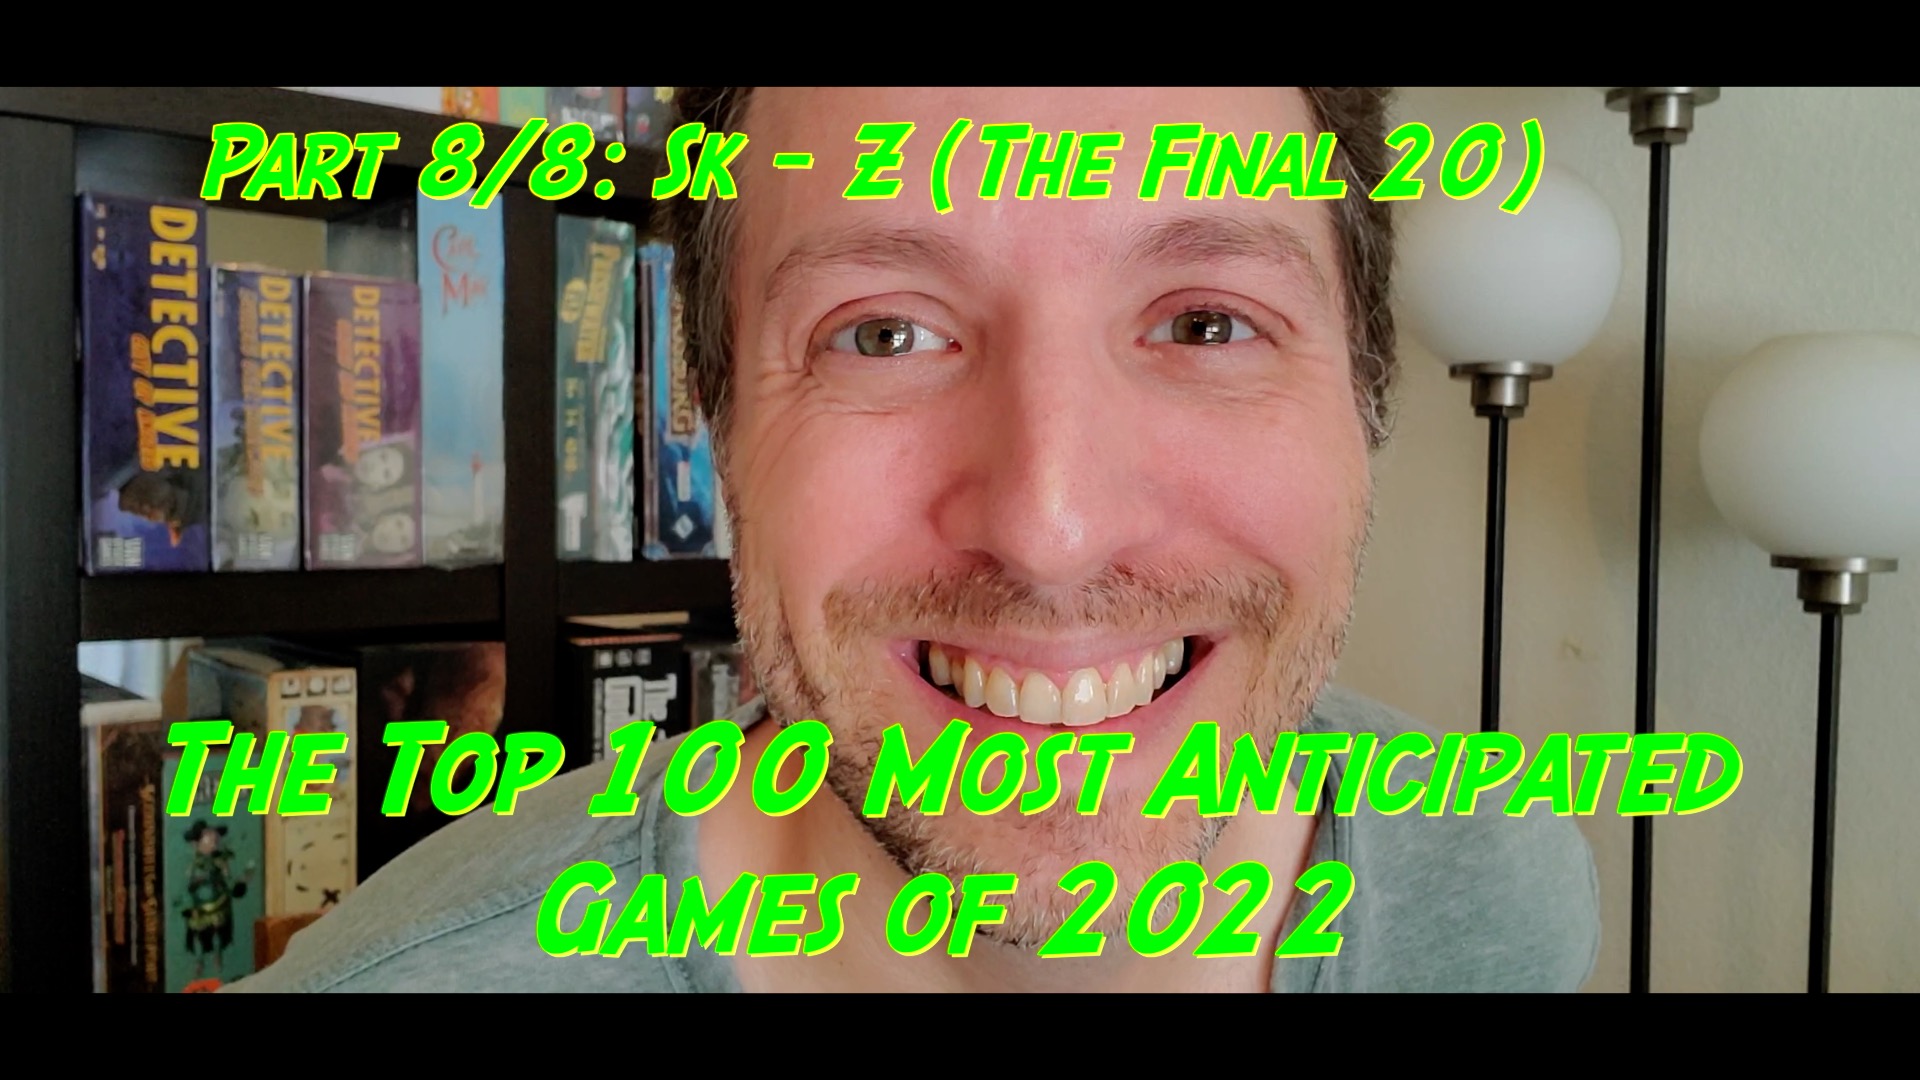 The Top 100 Most-Anticipated Games of 2022, Part 8/8: Sk – Z (The Final 20)